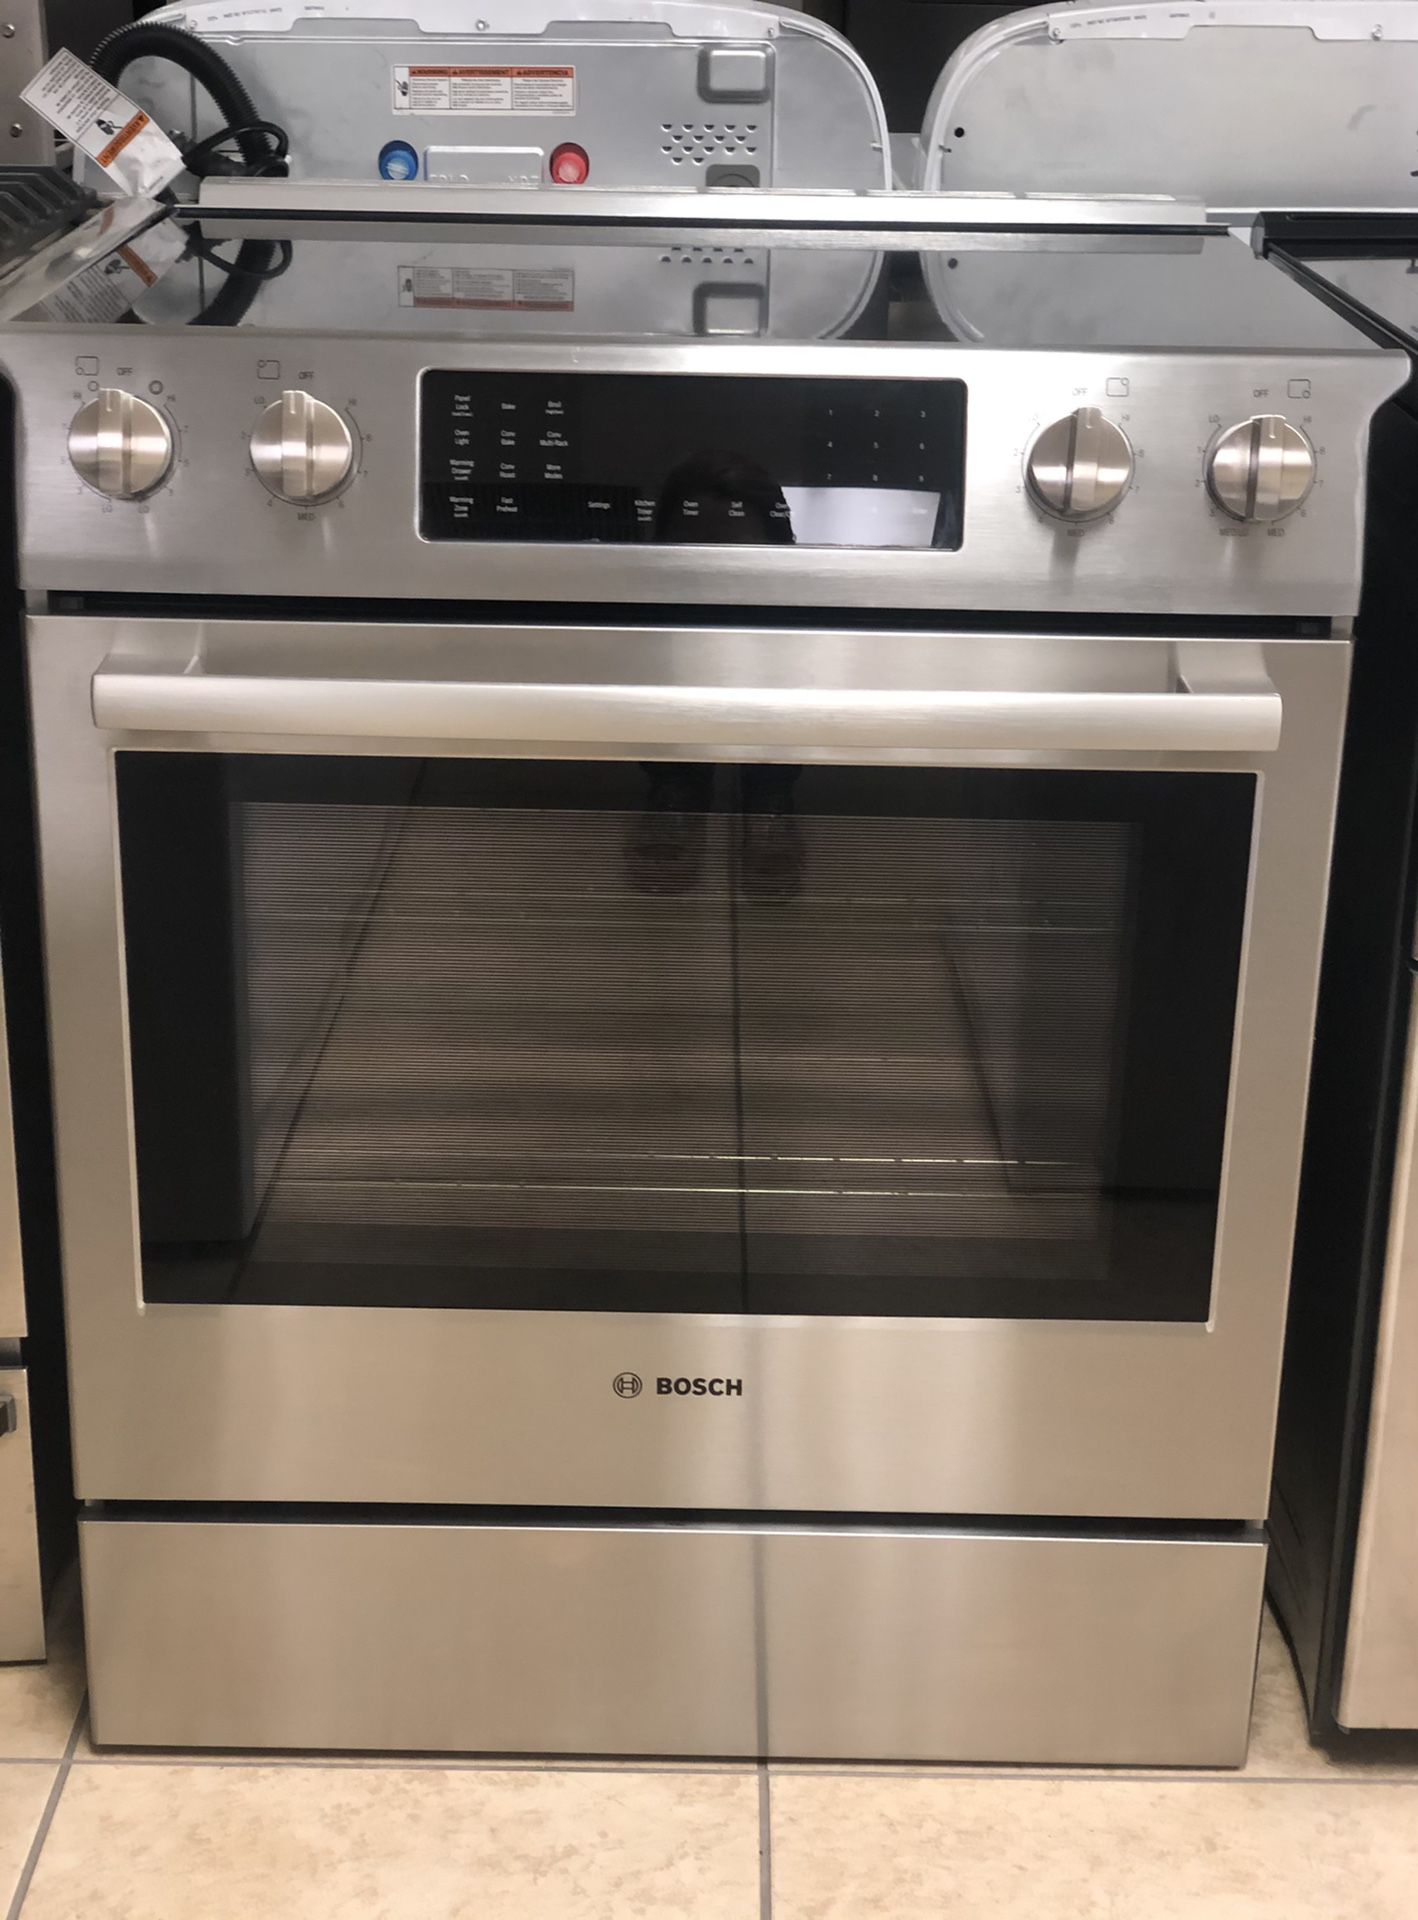 Bosh Slide Electric stove stainless steel convectional oven like new